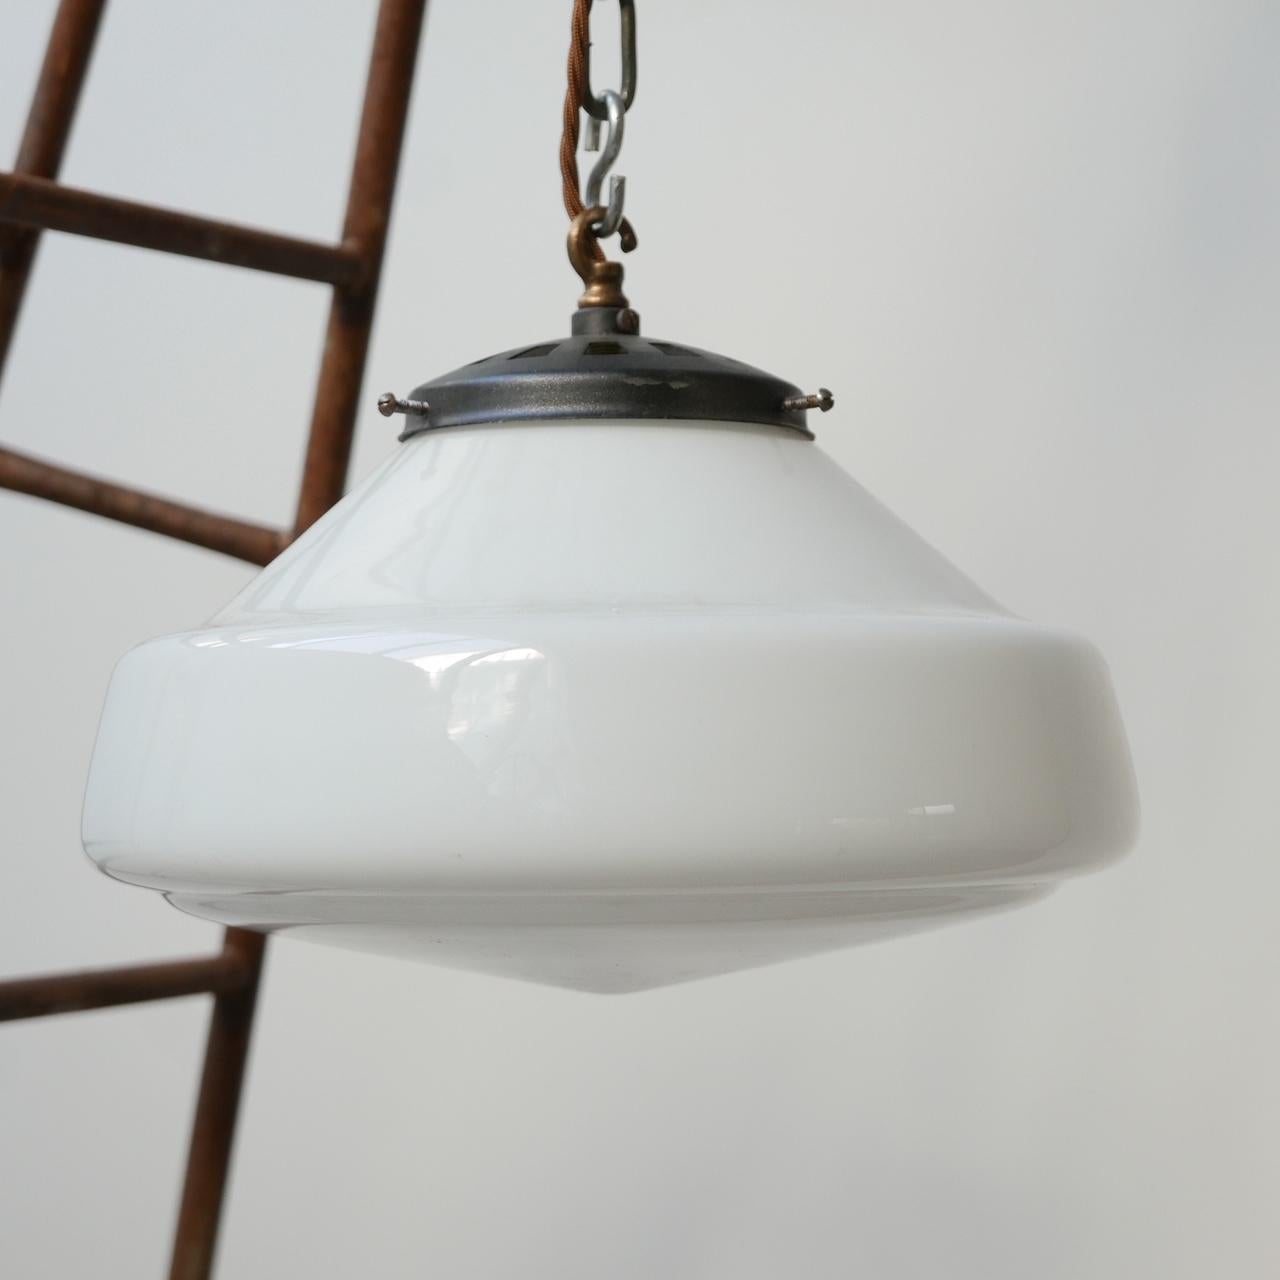 Midcentury pendant lights,

Holland, circa 1950s.

Opaline glass, brushed steel galleries.

Re-wired and PAT tested.

Four available. Three are perfect condition. One has a crack to rim of the glass which cannot be seen but must be